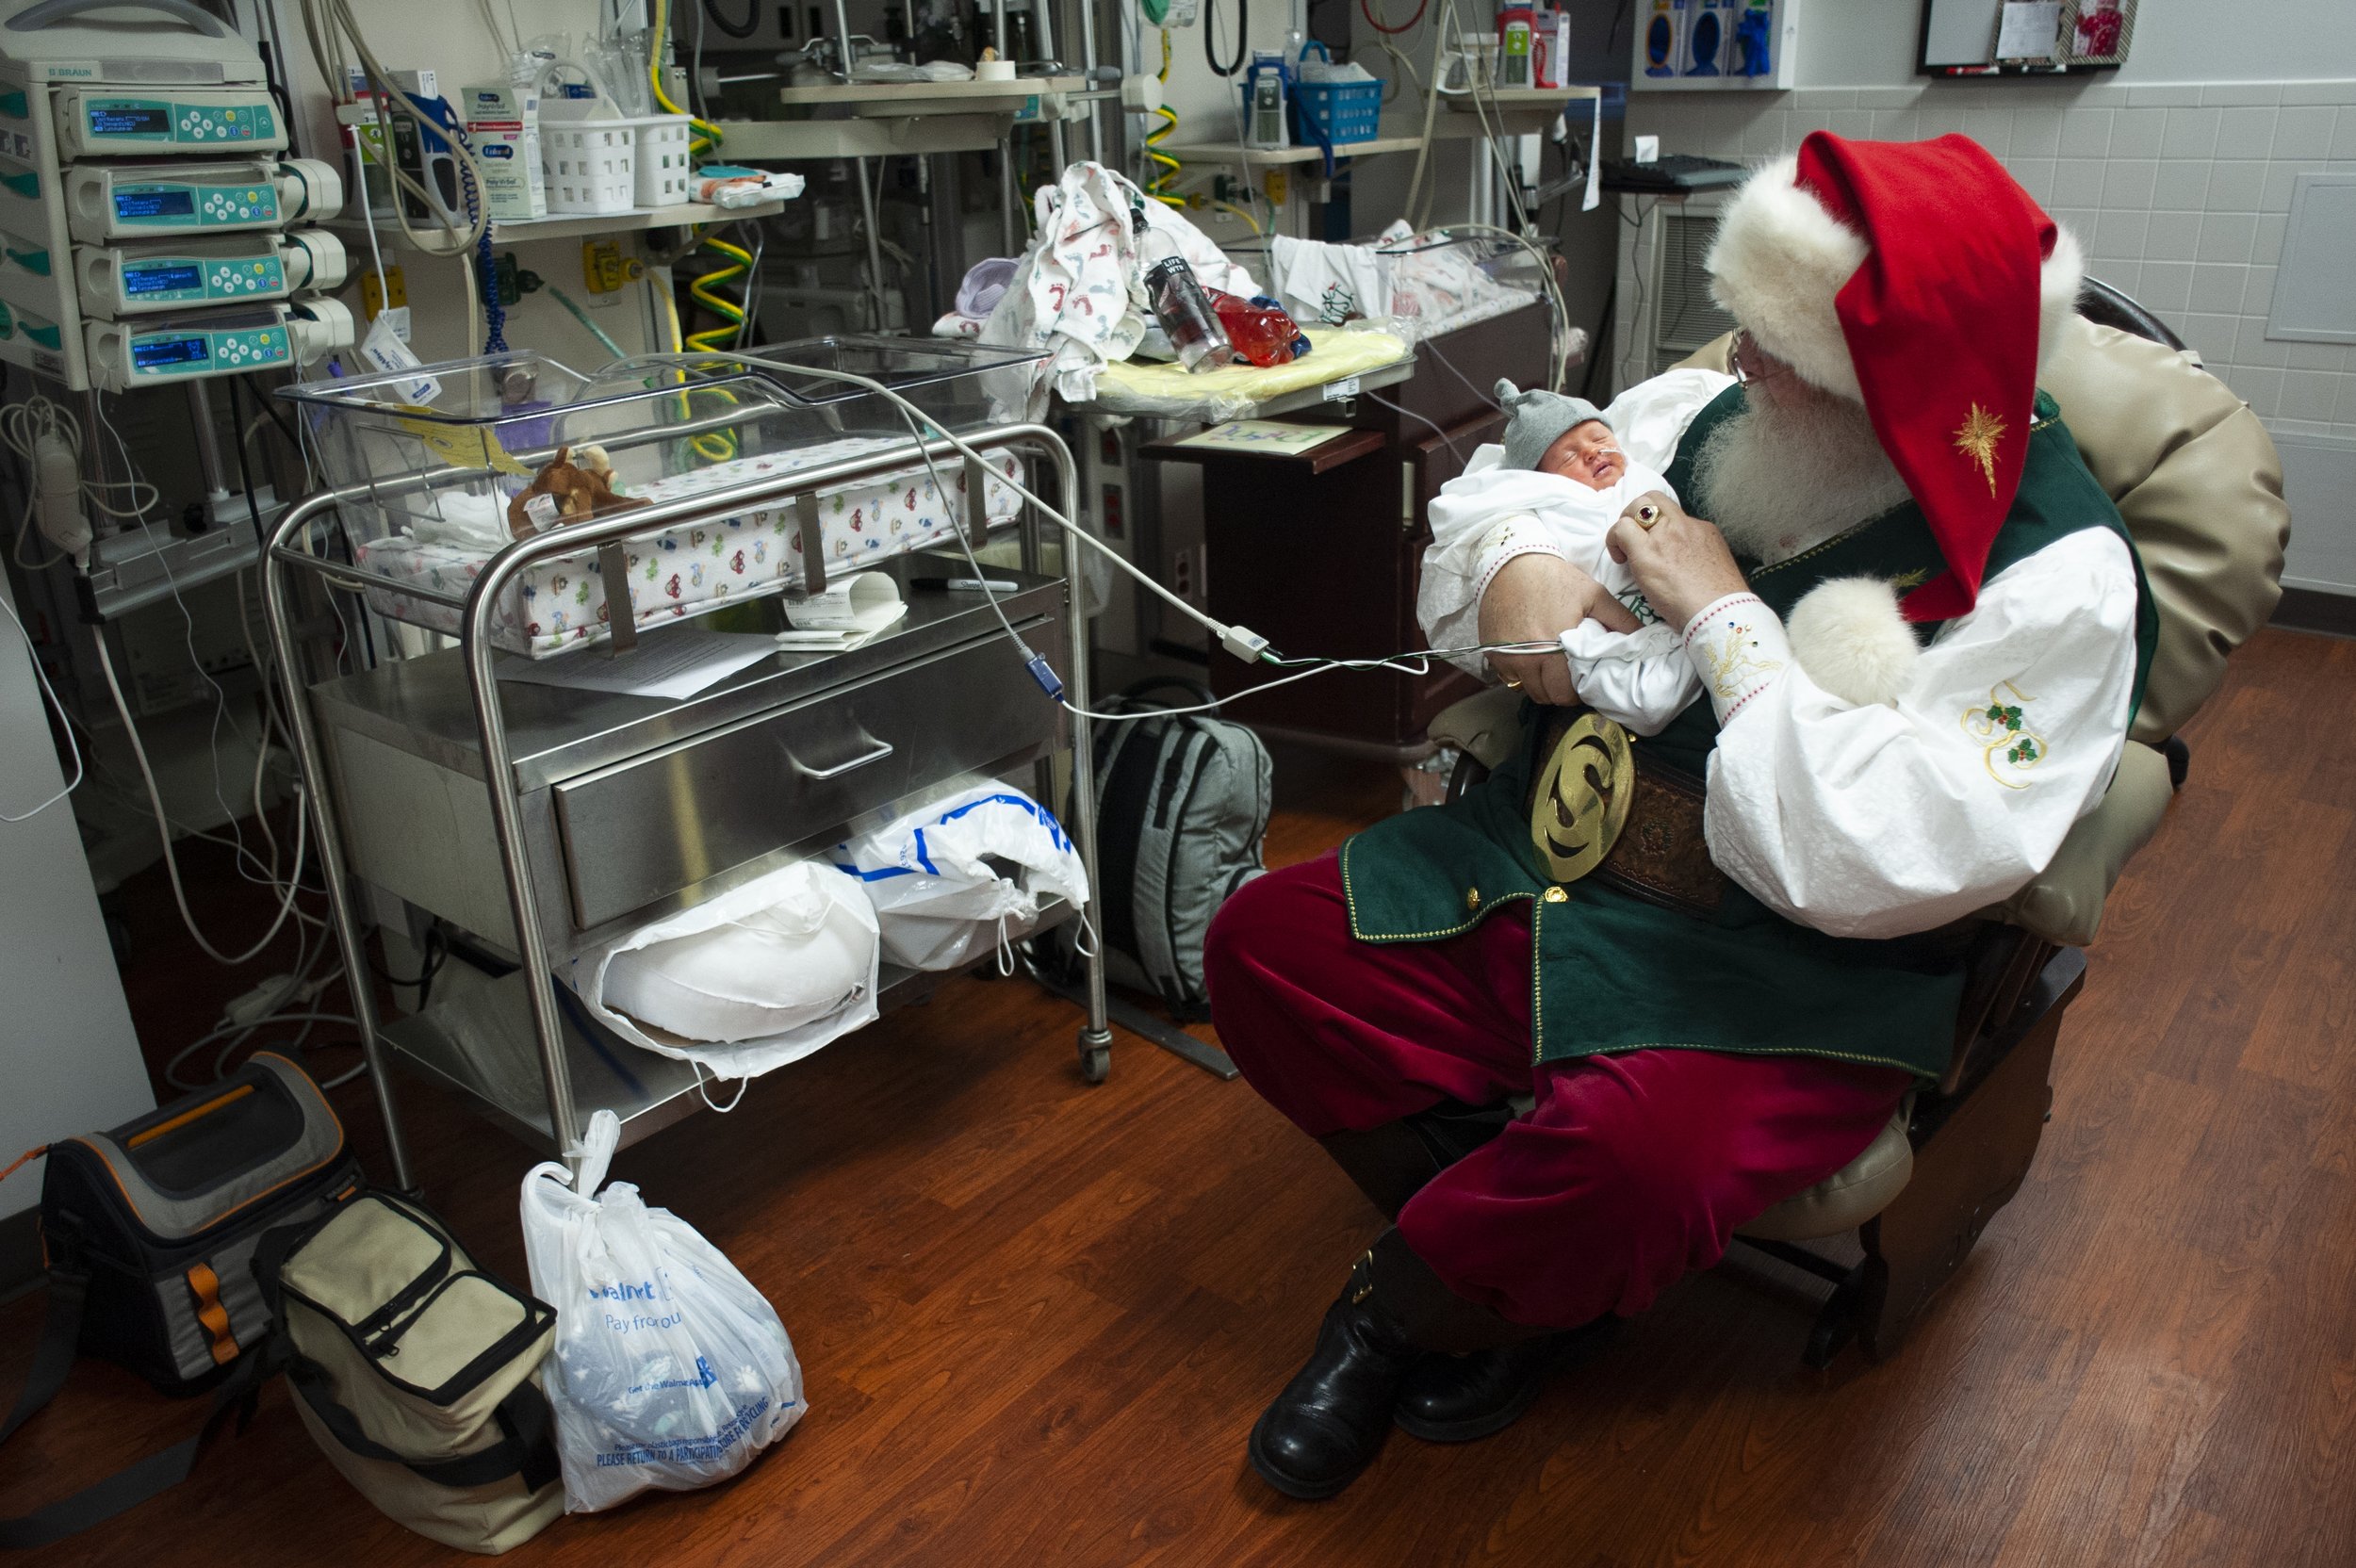  Santa Claus, portrayed by Steve Southard of Jonesboro, pays a visit to 9-day-old William “Liam” Clairday on Dec. 20 at St. Bernards Medical Center’s Neonatal Intensive Care Unit (NICU) in Jonesboro, Arkansas. “This is one of my emotional stops,” Sou